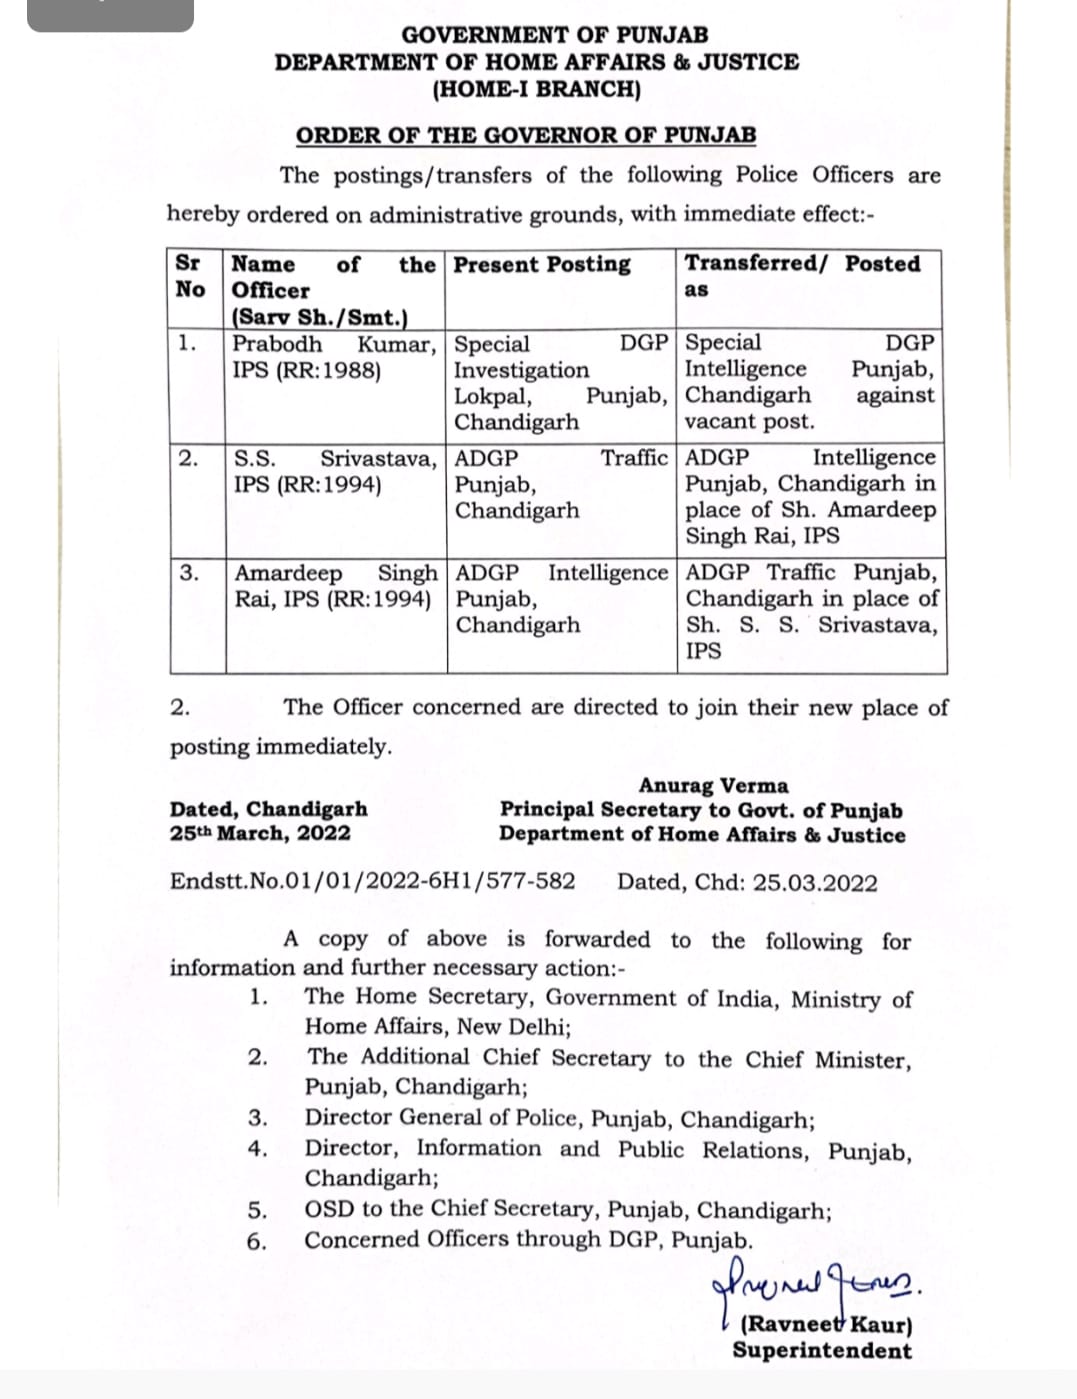 3 IPS officers transferred in Punjab